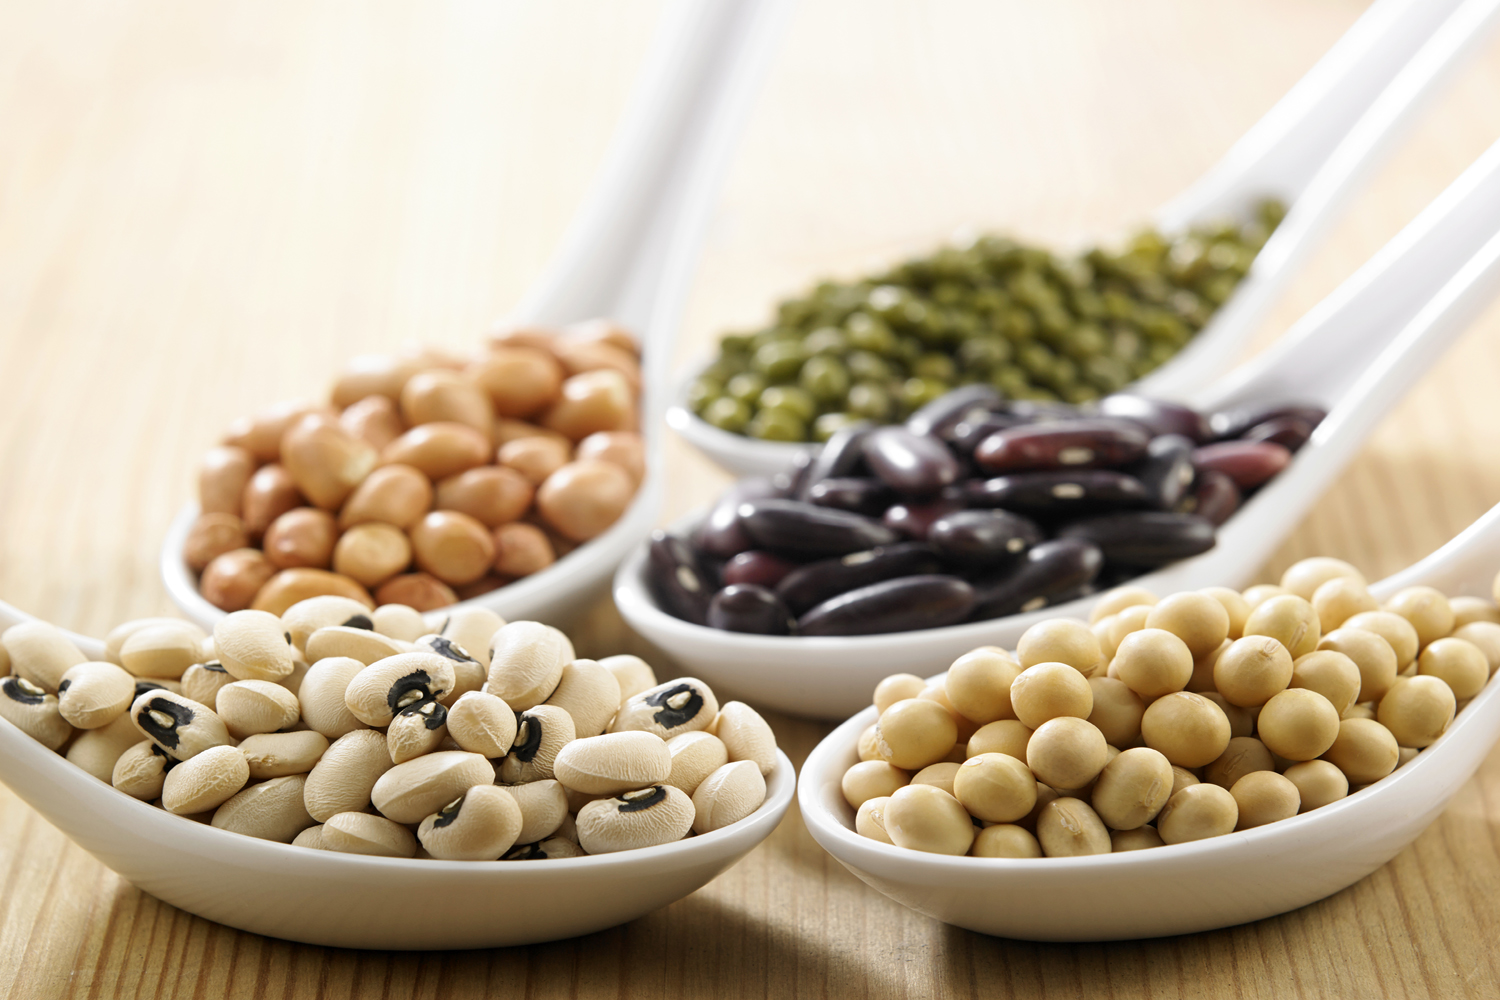 Beans and Legumes 101: Nutrition, Benefits, and Meal Ideas - The Manual